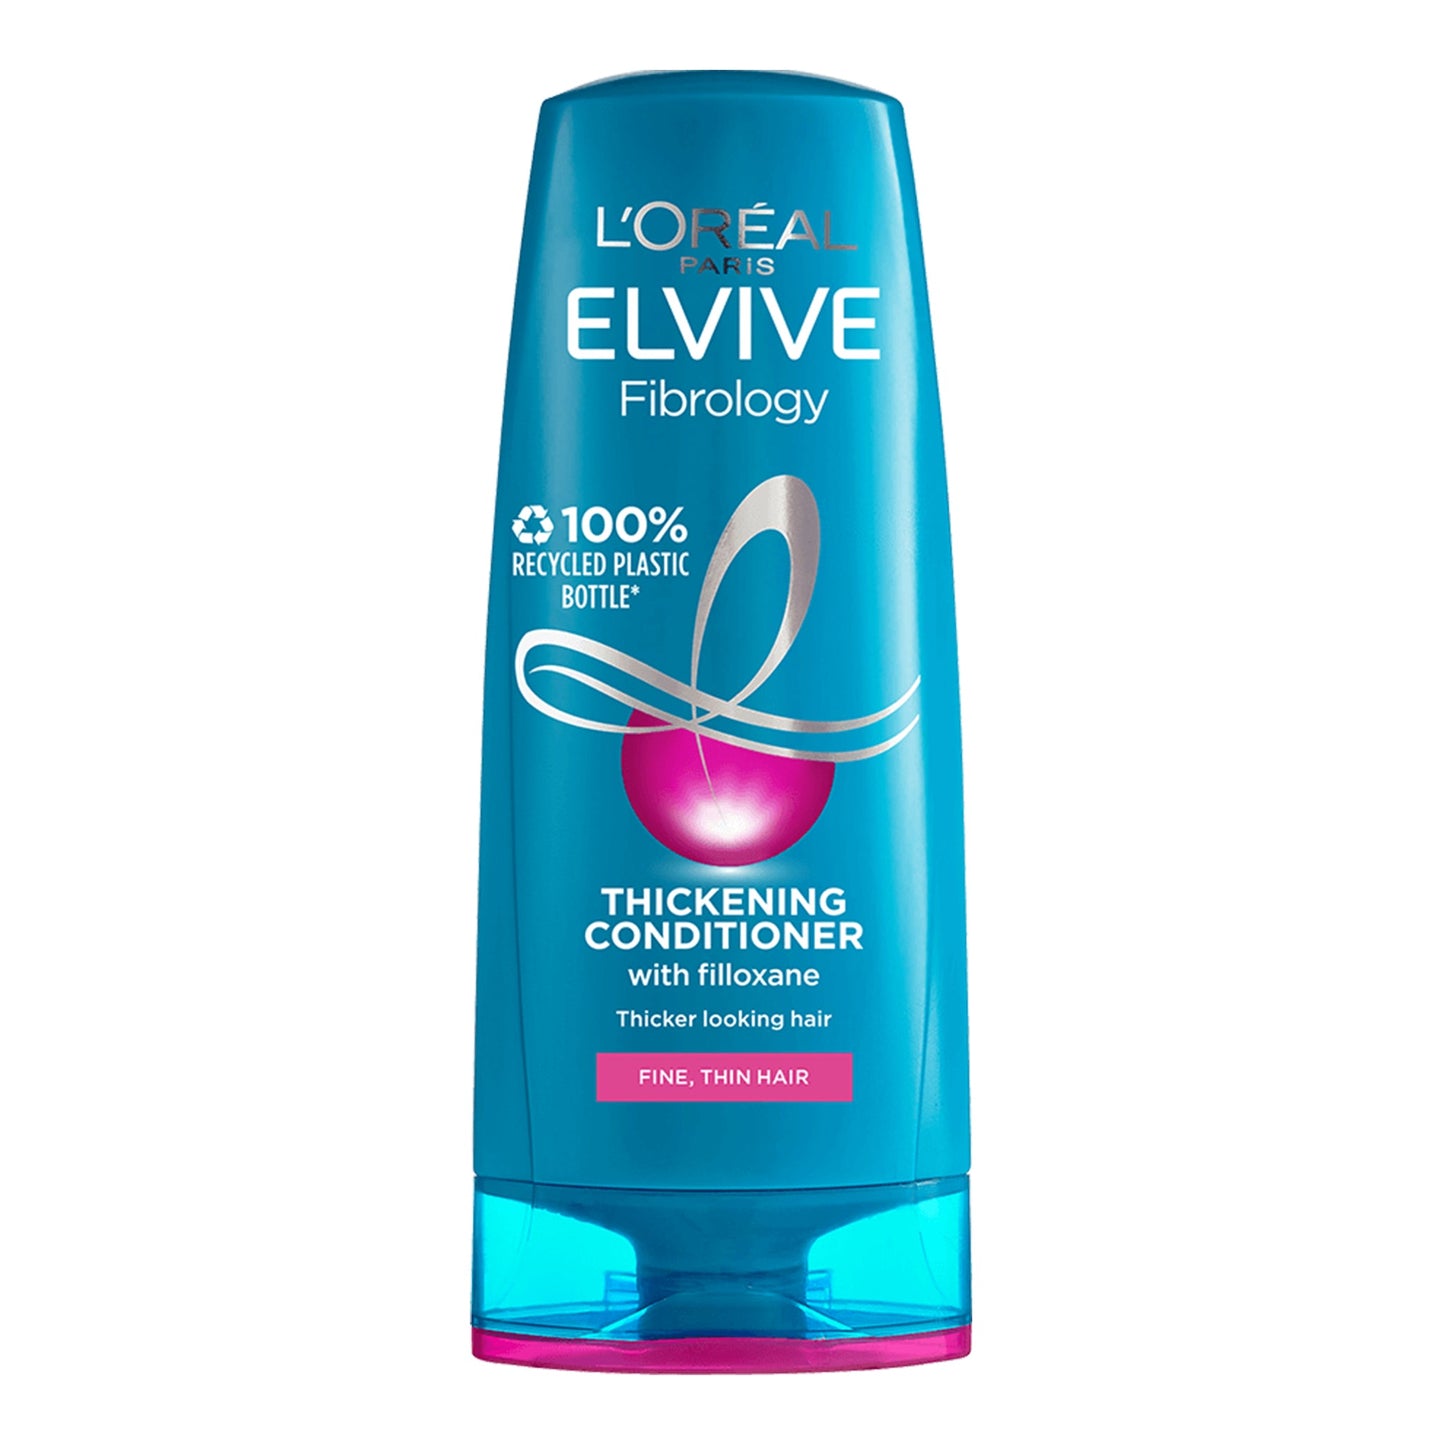 L'OREAL PARIS - ELVIVE FIBROLOGY THICKENING CONDITIONER WITH FILLOXANE - 300ML